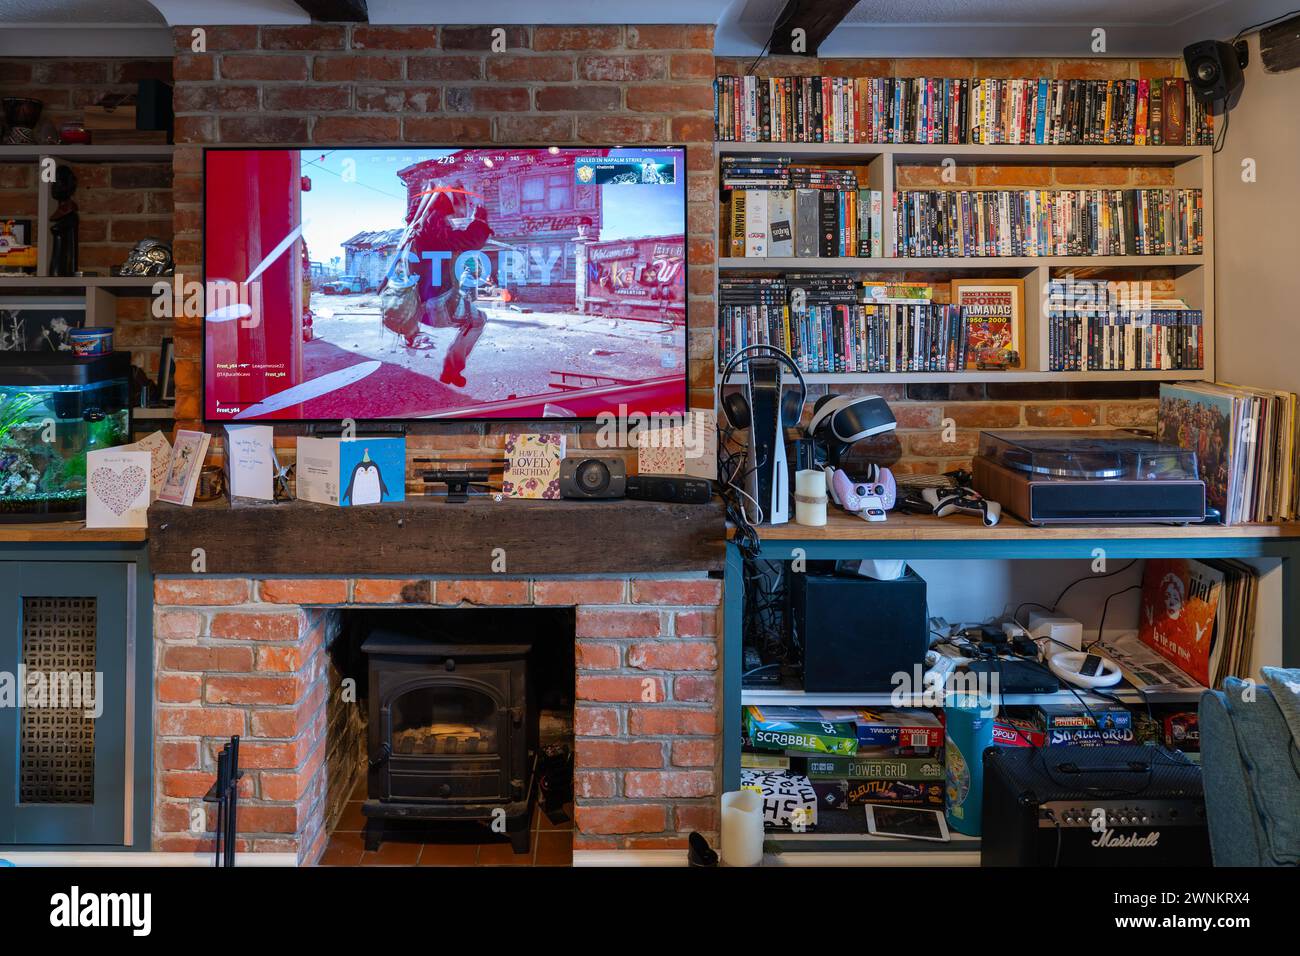 Call of Duty Black Ops Cold War being played on a PS5 with the victory screen showing on a tv screen in a UK lounge, with physical media on shelves Stock Photo